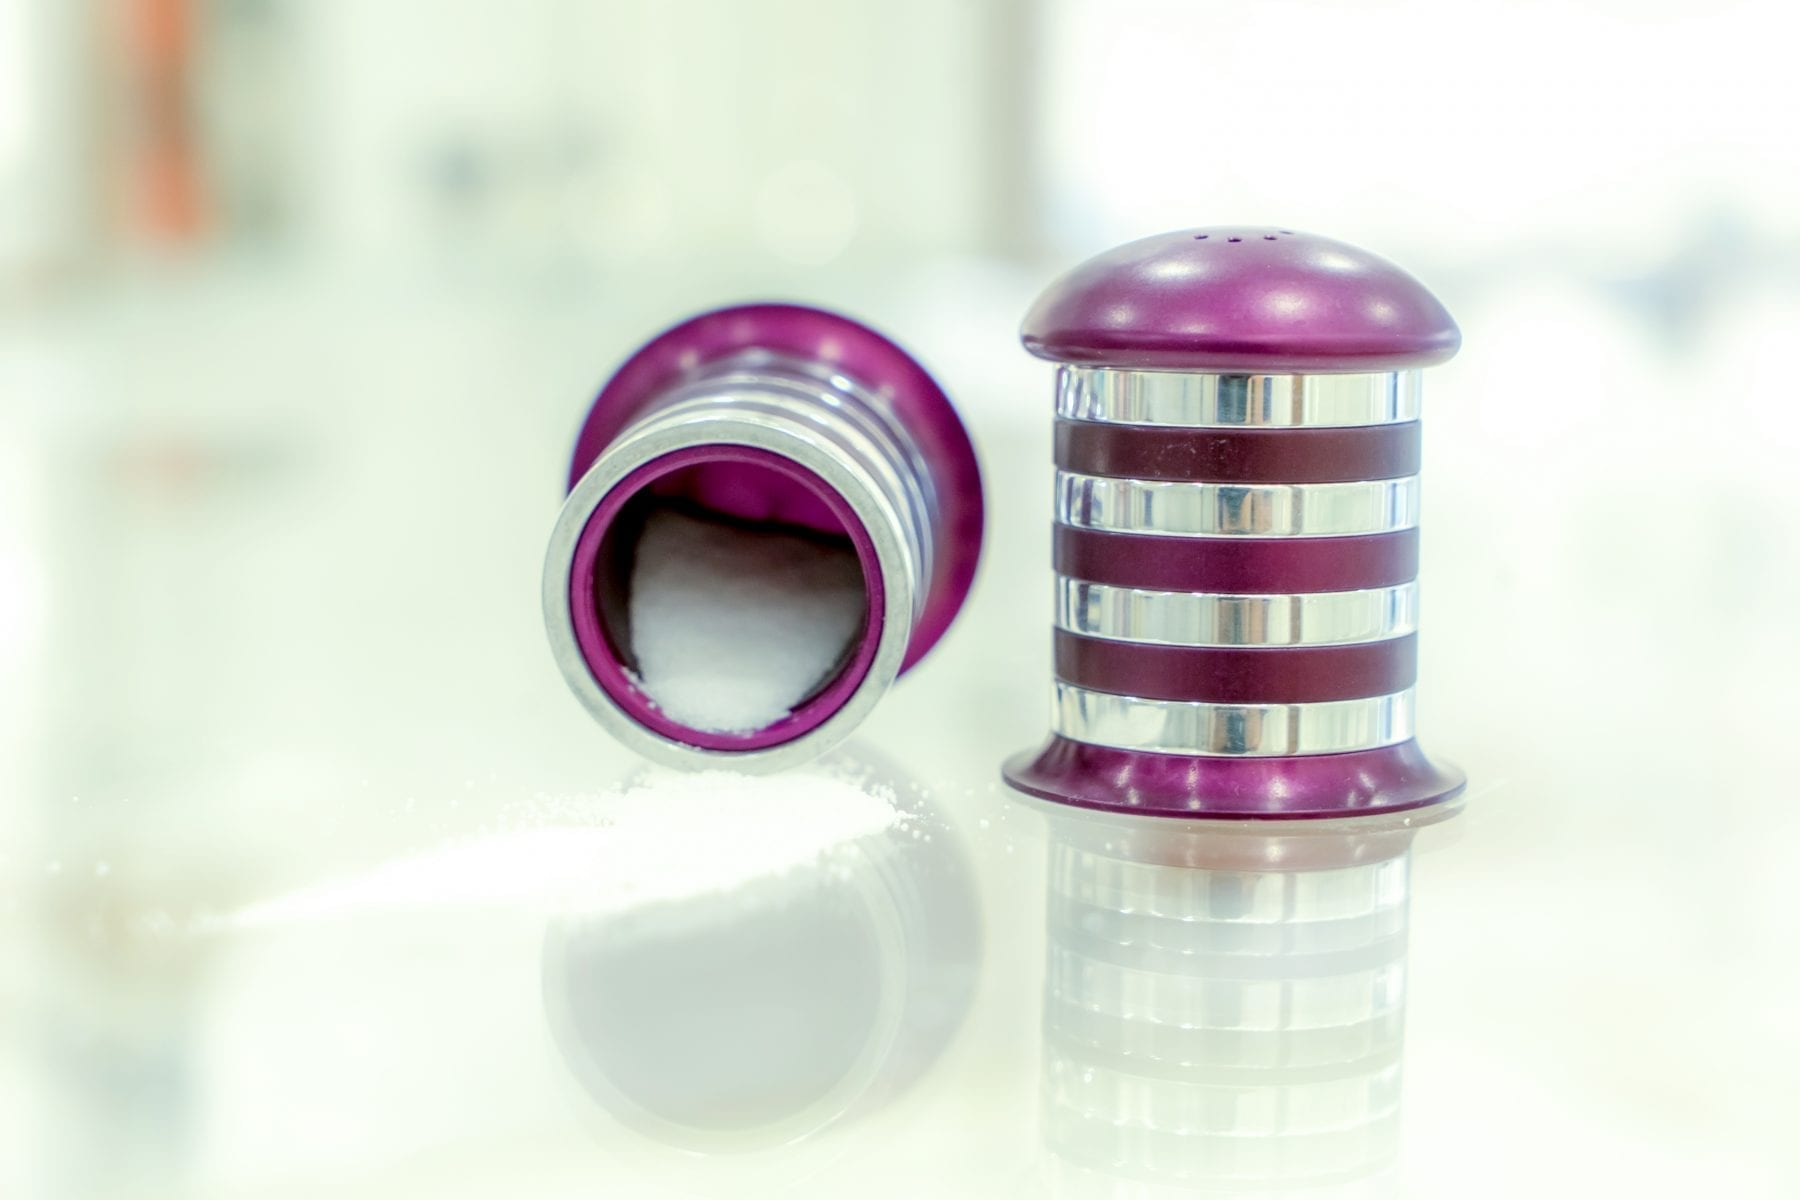 Salt and Pepper Aluminum Tableware with Shiny Rings